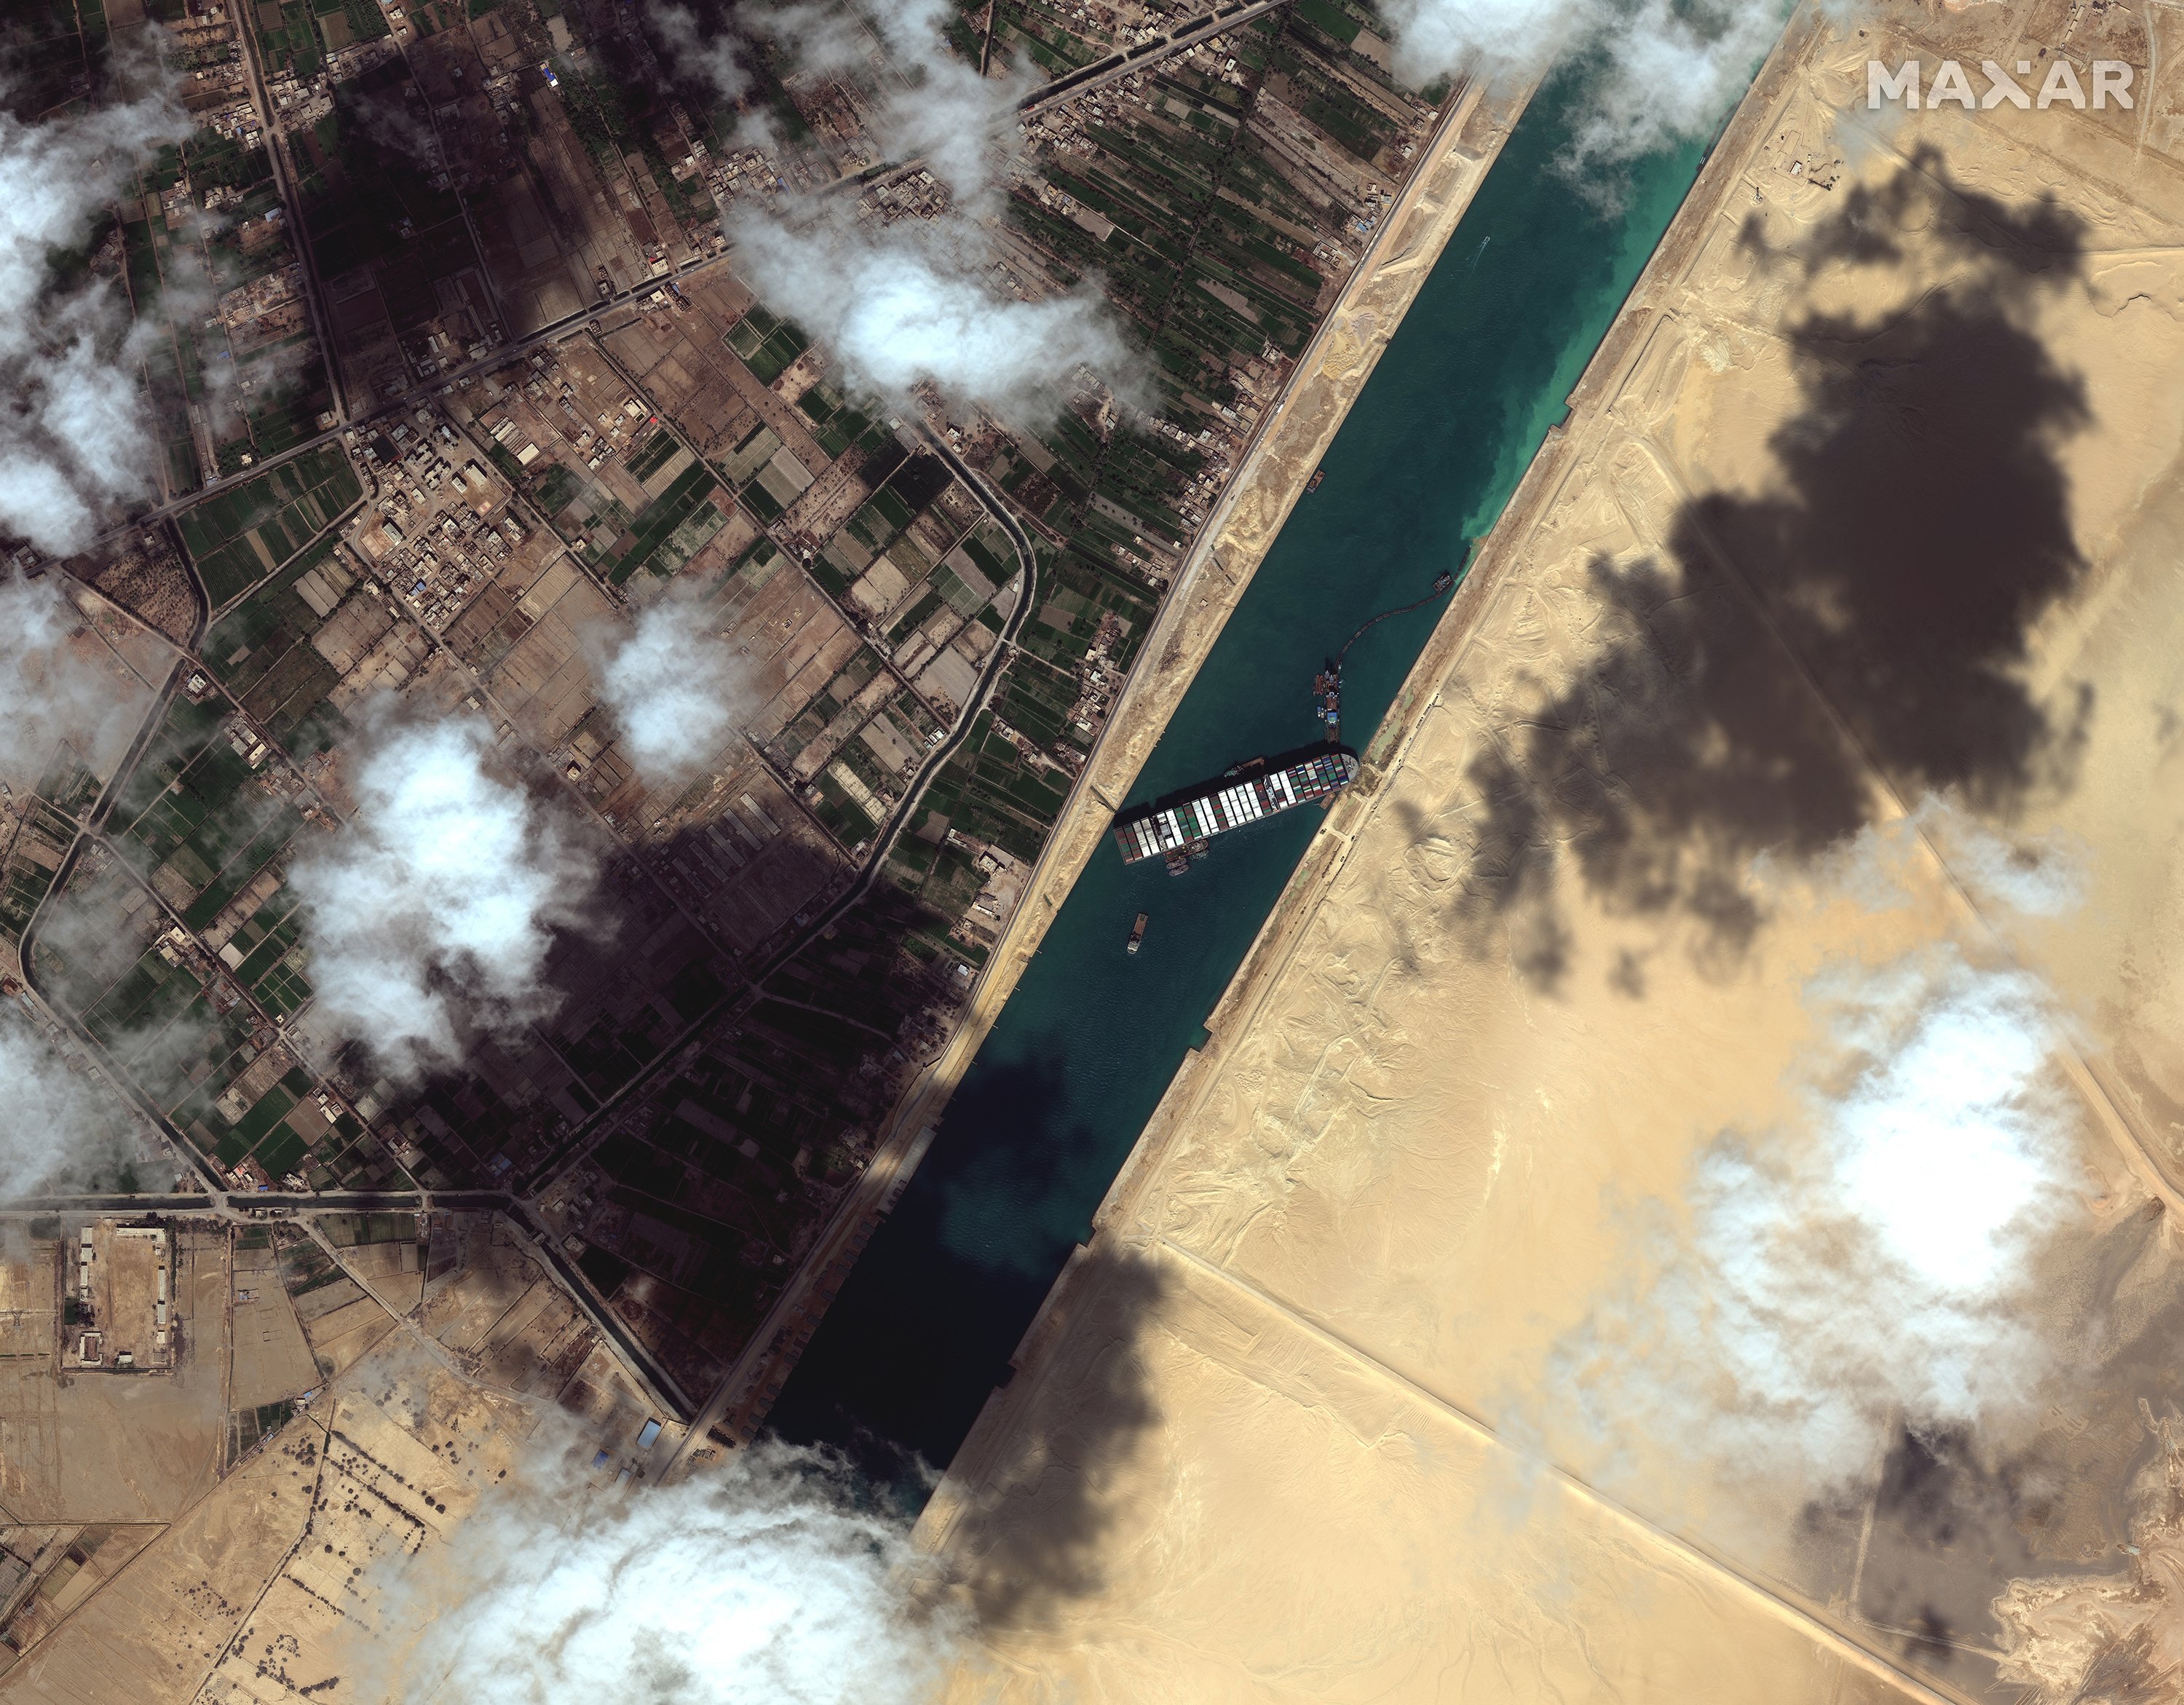 2 tugs are heading for the Suez Canal in Egypt as shippers avoid it